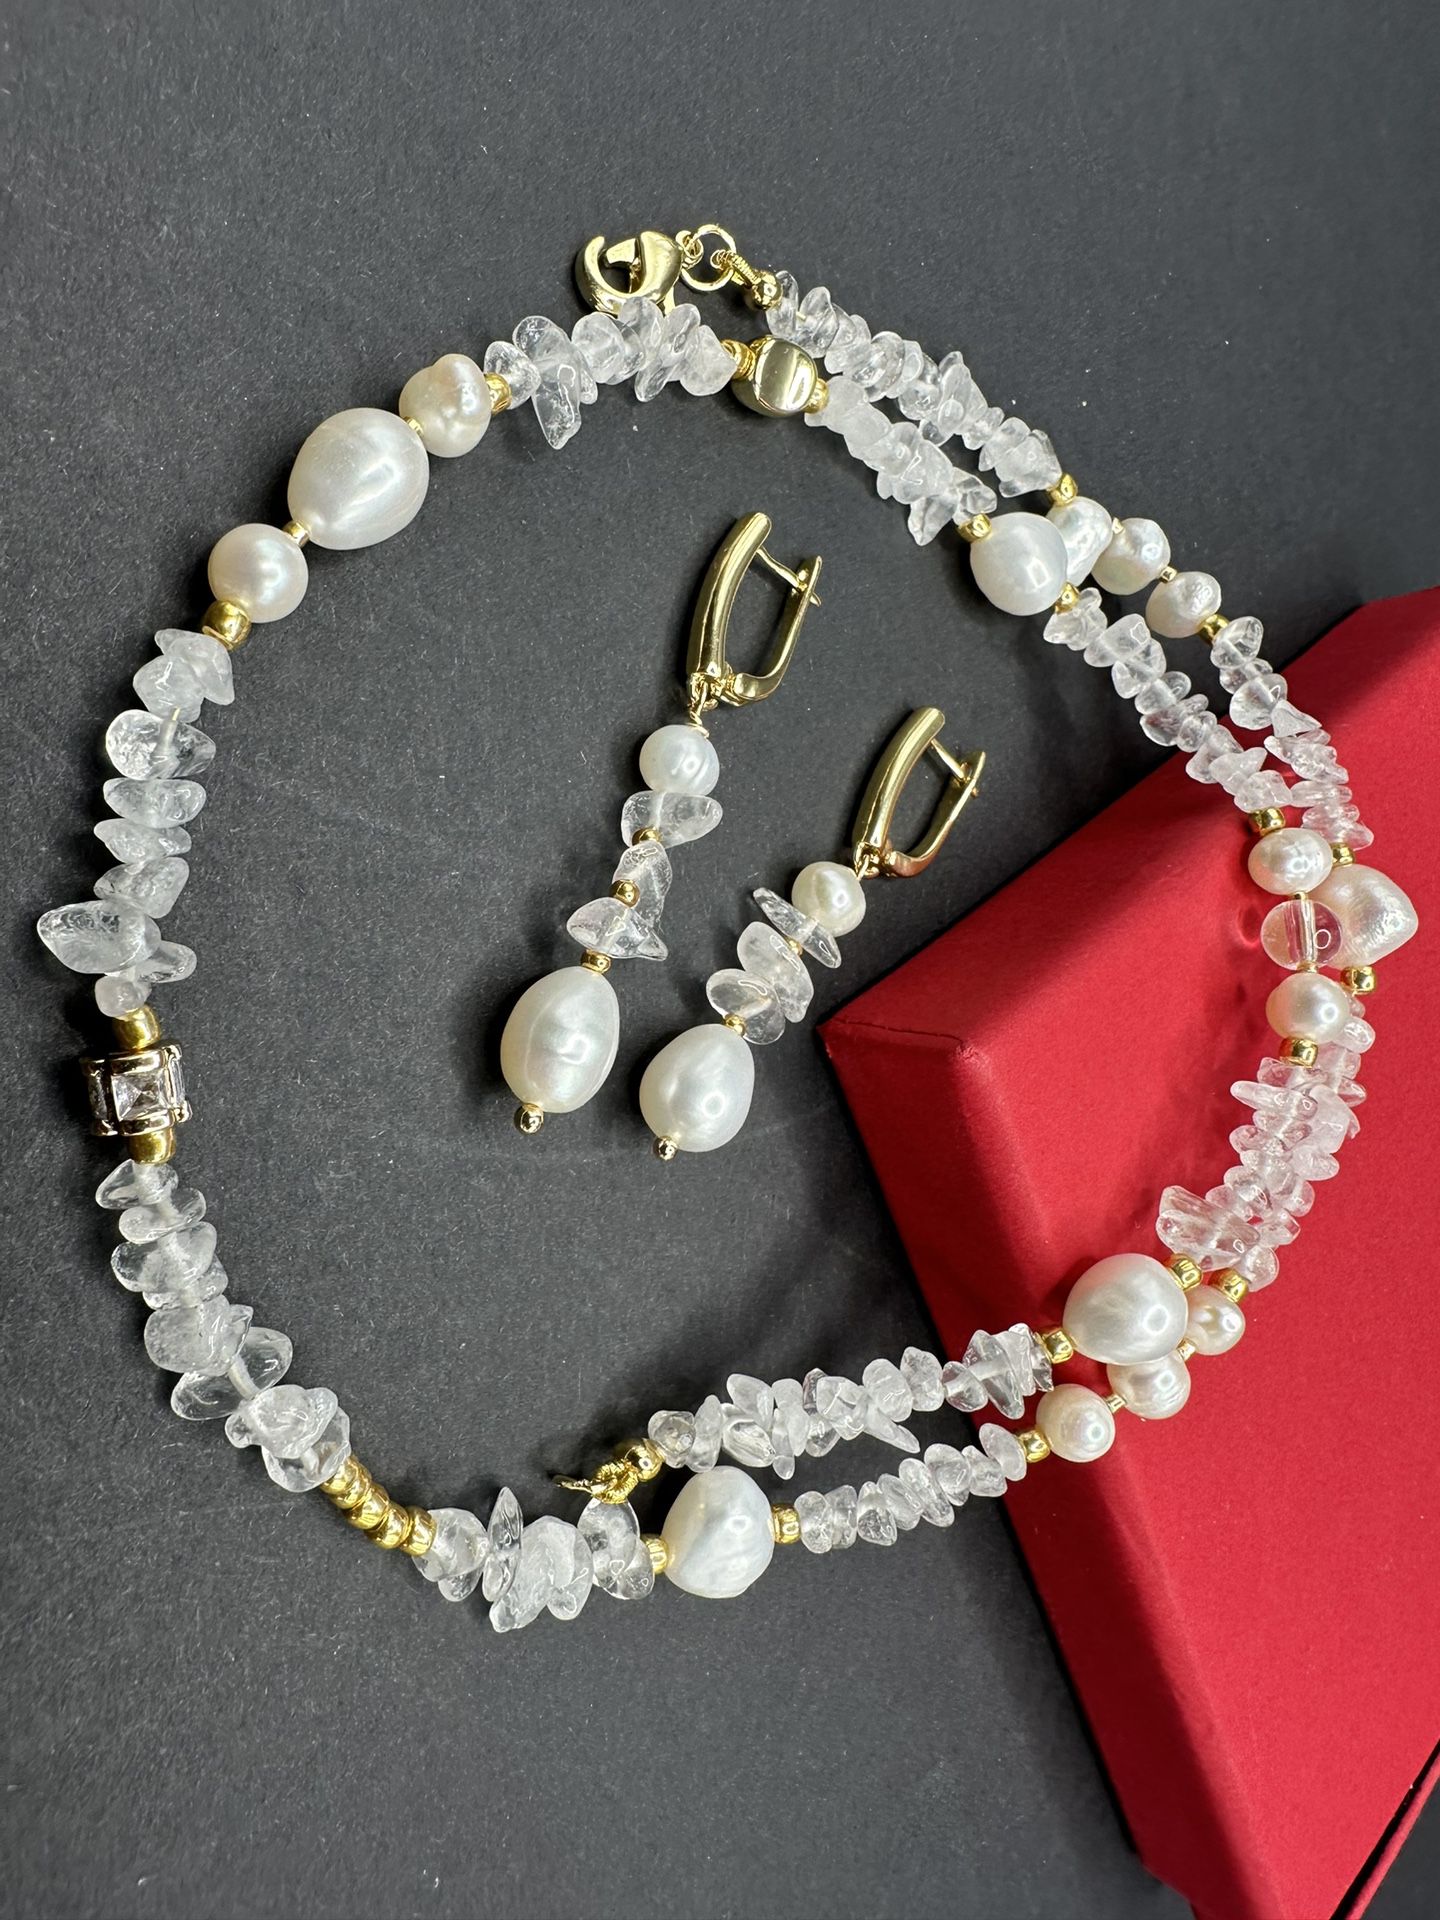 Set of 2: earrings and choker, white natural pearls and rock crystals, wedding necklace